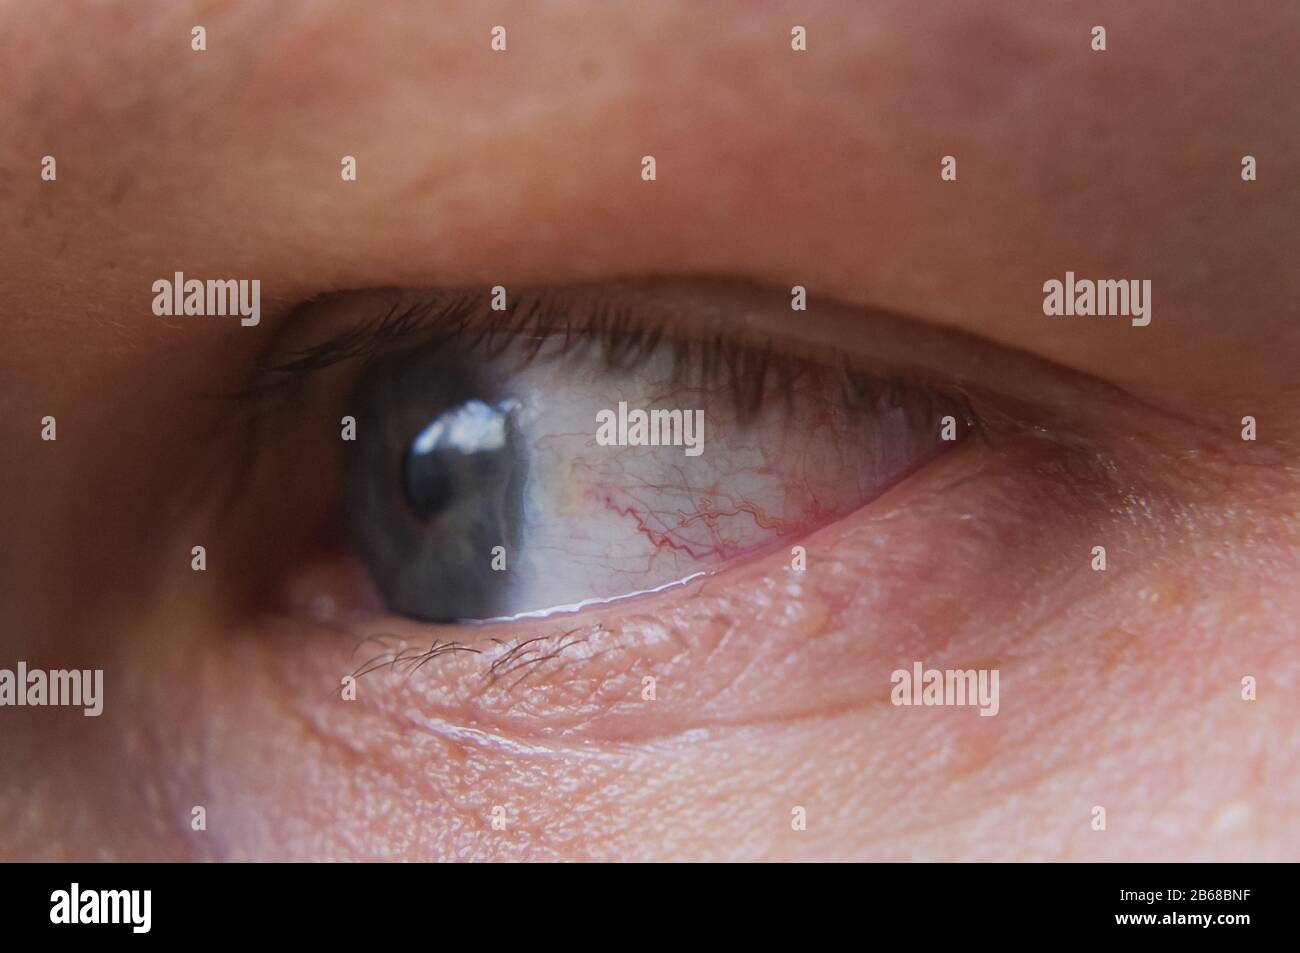 Macro close up red eye with conjunctivitis infection Stock Photo -